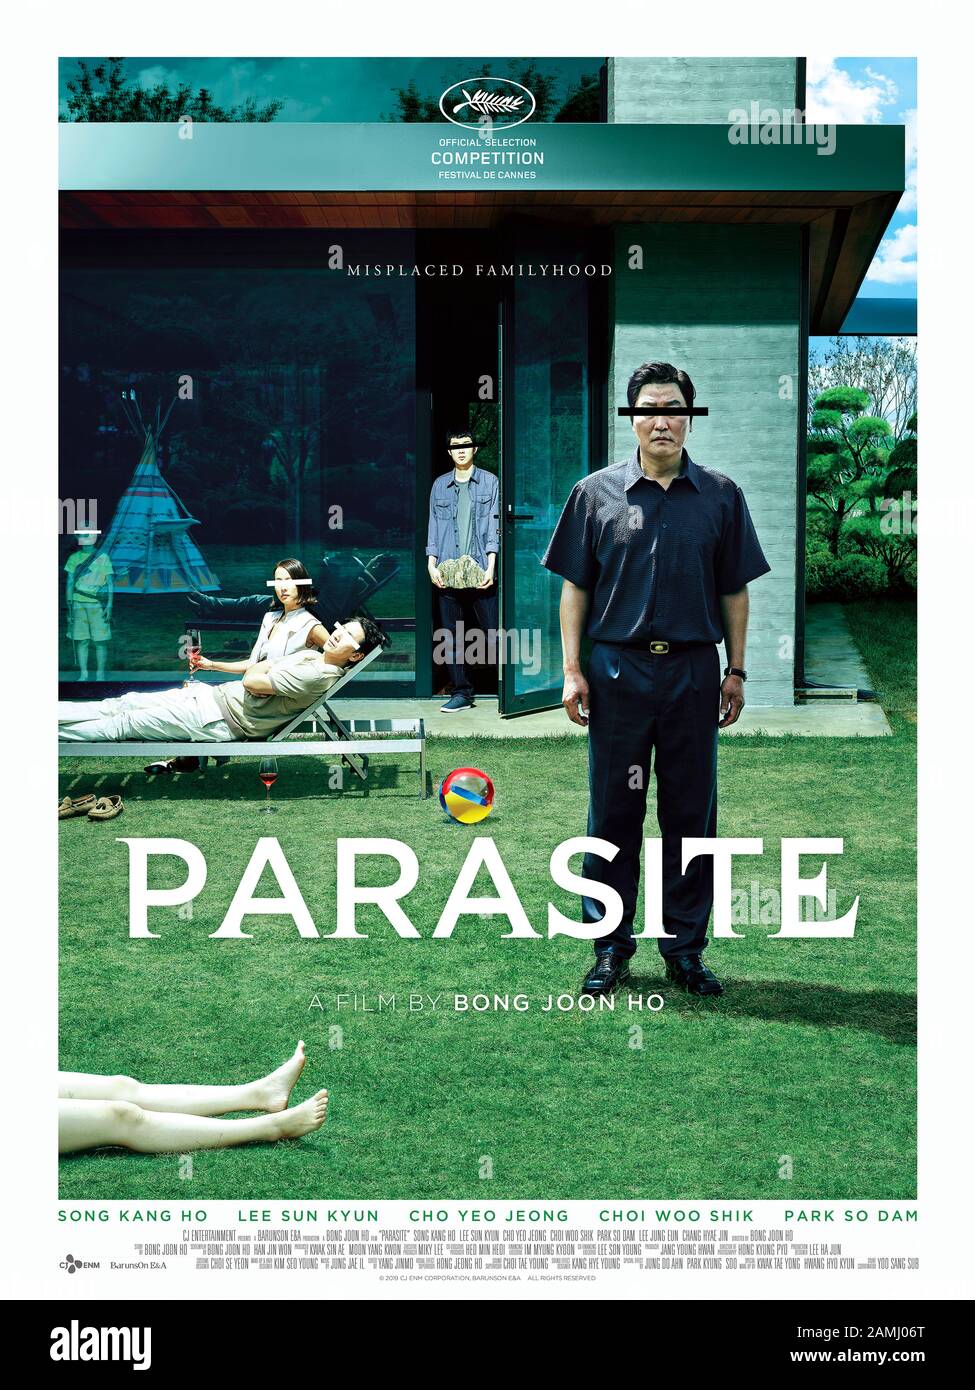 Parasite [Gisaengchung ] (2019) directed by Bong Joon Ho and starring Kang-ho Song, Sun-kyun Lee and Yeo-jeong Jo. A poor family ingratiates itself with a wealthy family leads to unexpected results in this clever South Korean thriller. Stock Photo